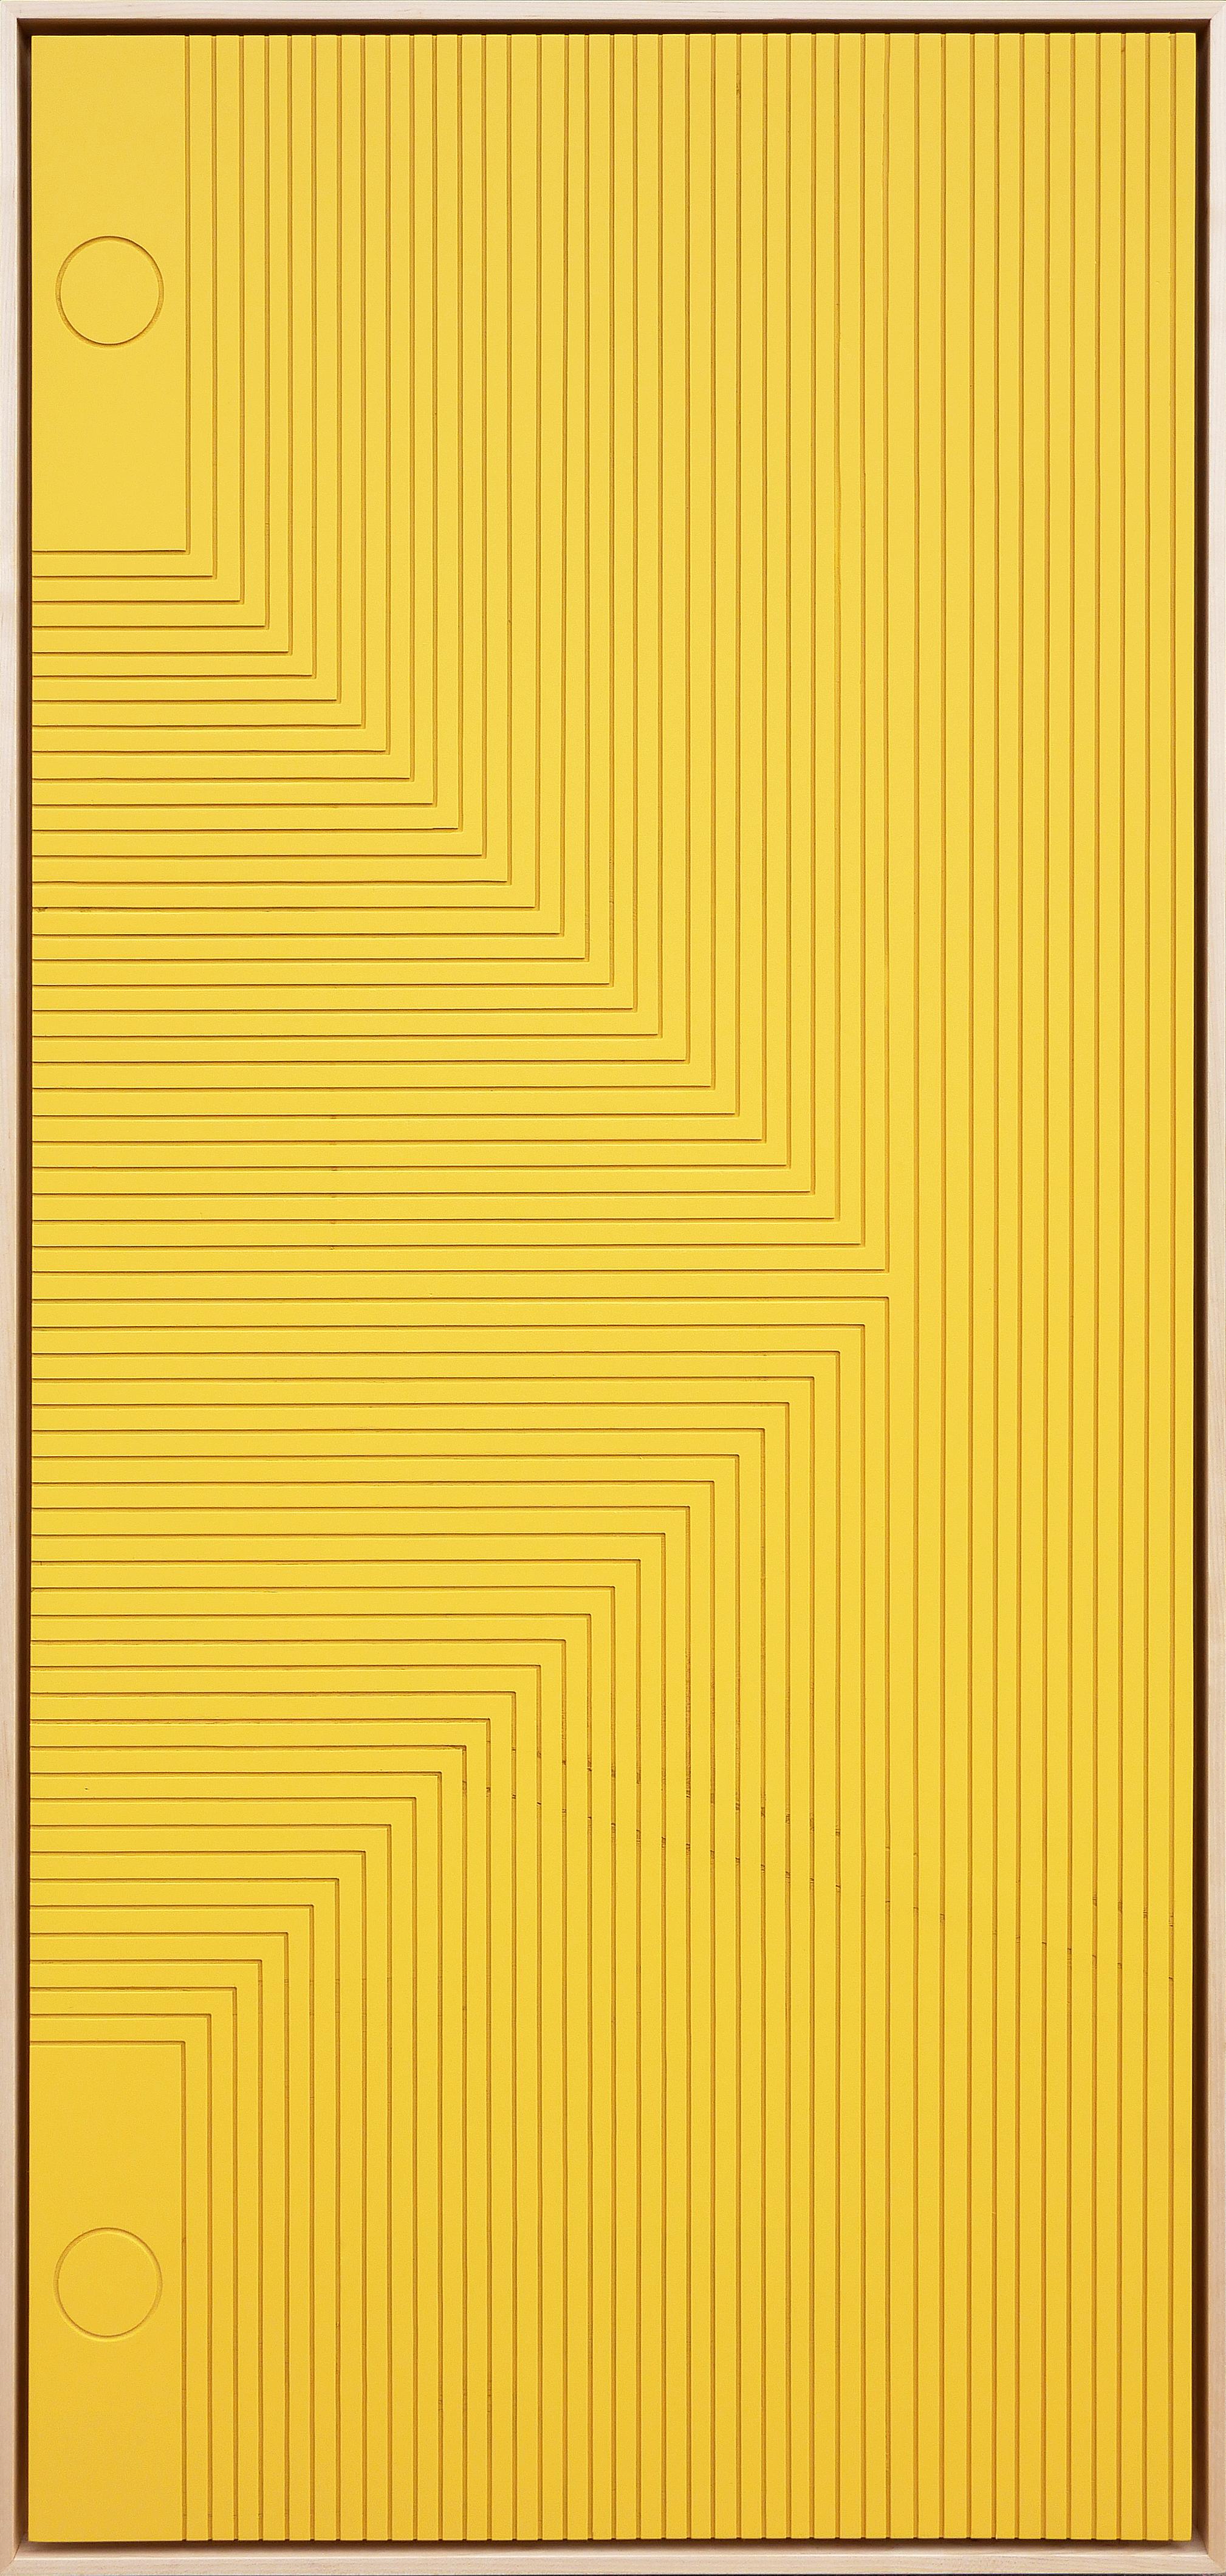 "Love Note" Contemporary Yellow Linear Abstract Geometric Groove Painting 